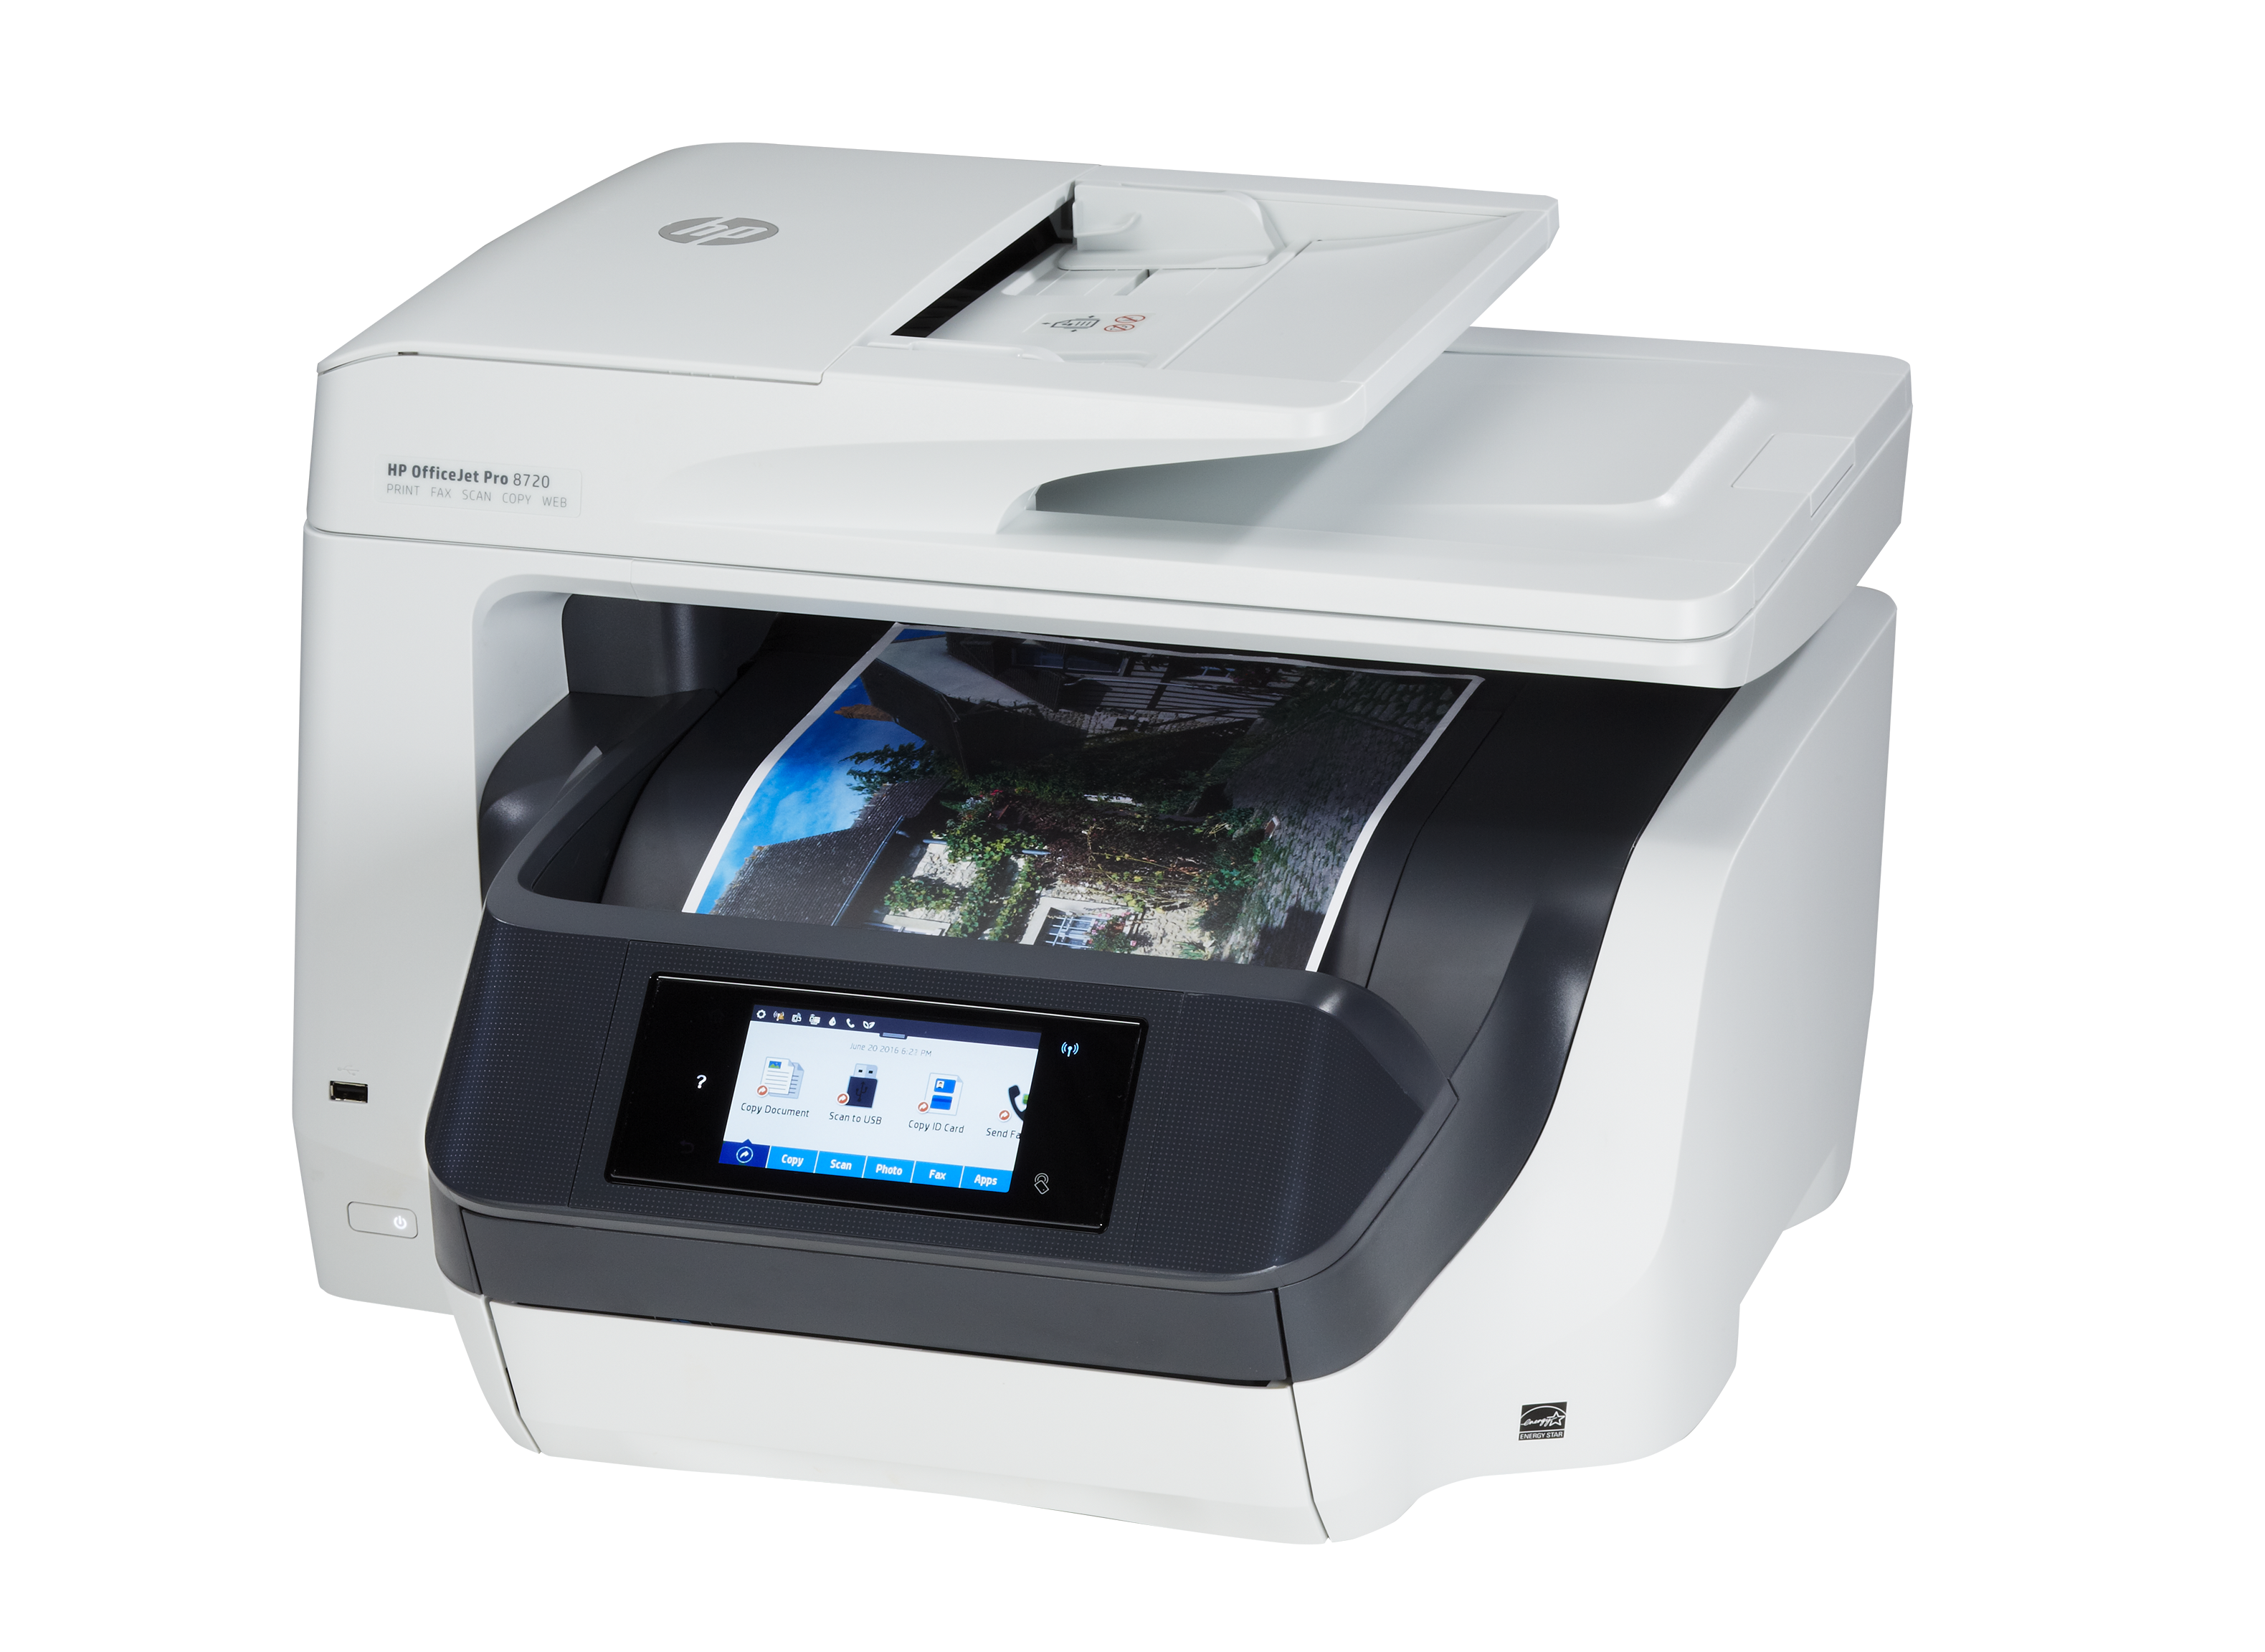 HP Officejet Pro 8720 Printer Review - Consumer Reports